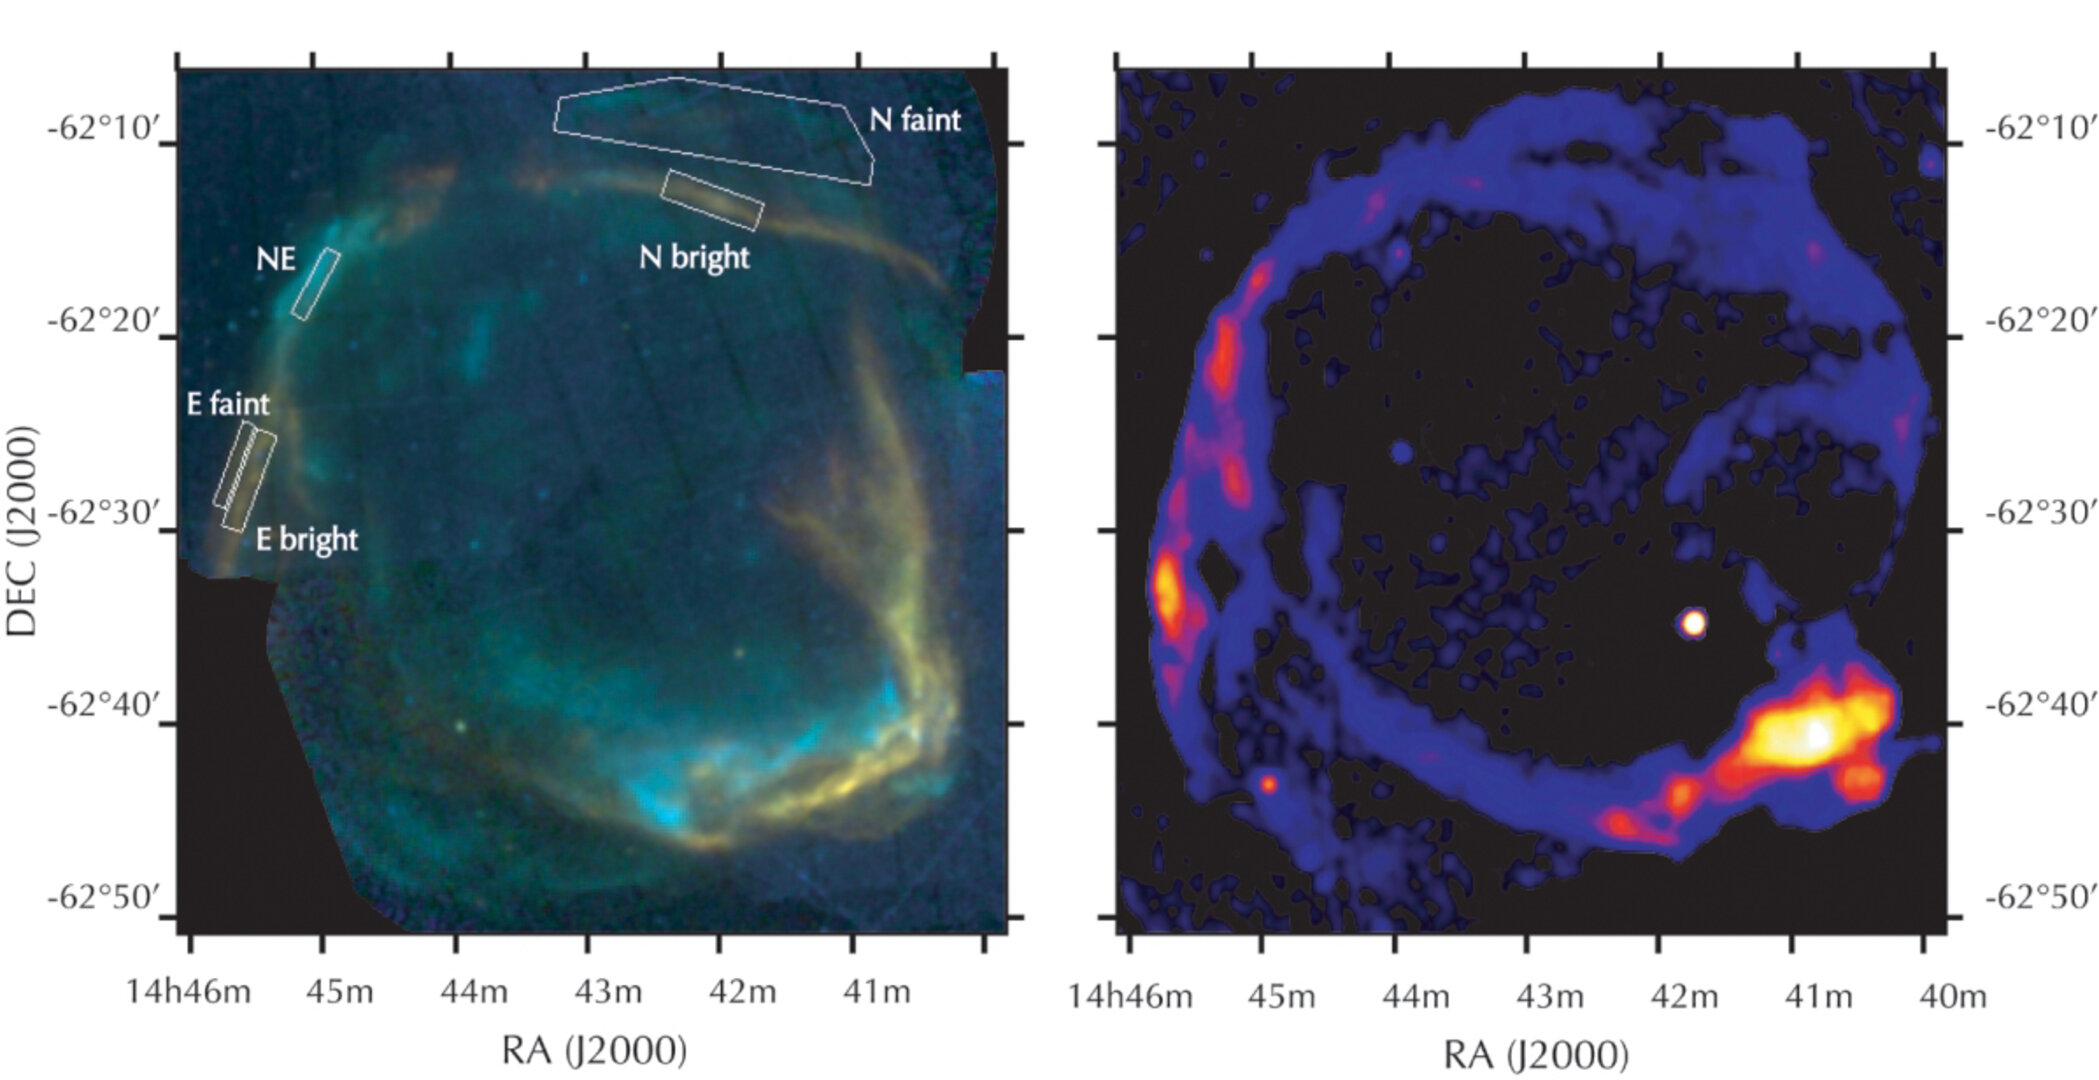 XMM-Newton and MOST images of supernova remnant 'RCW 86'